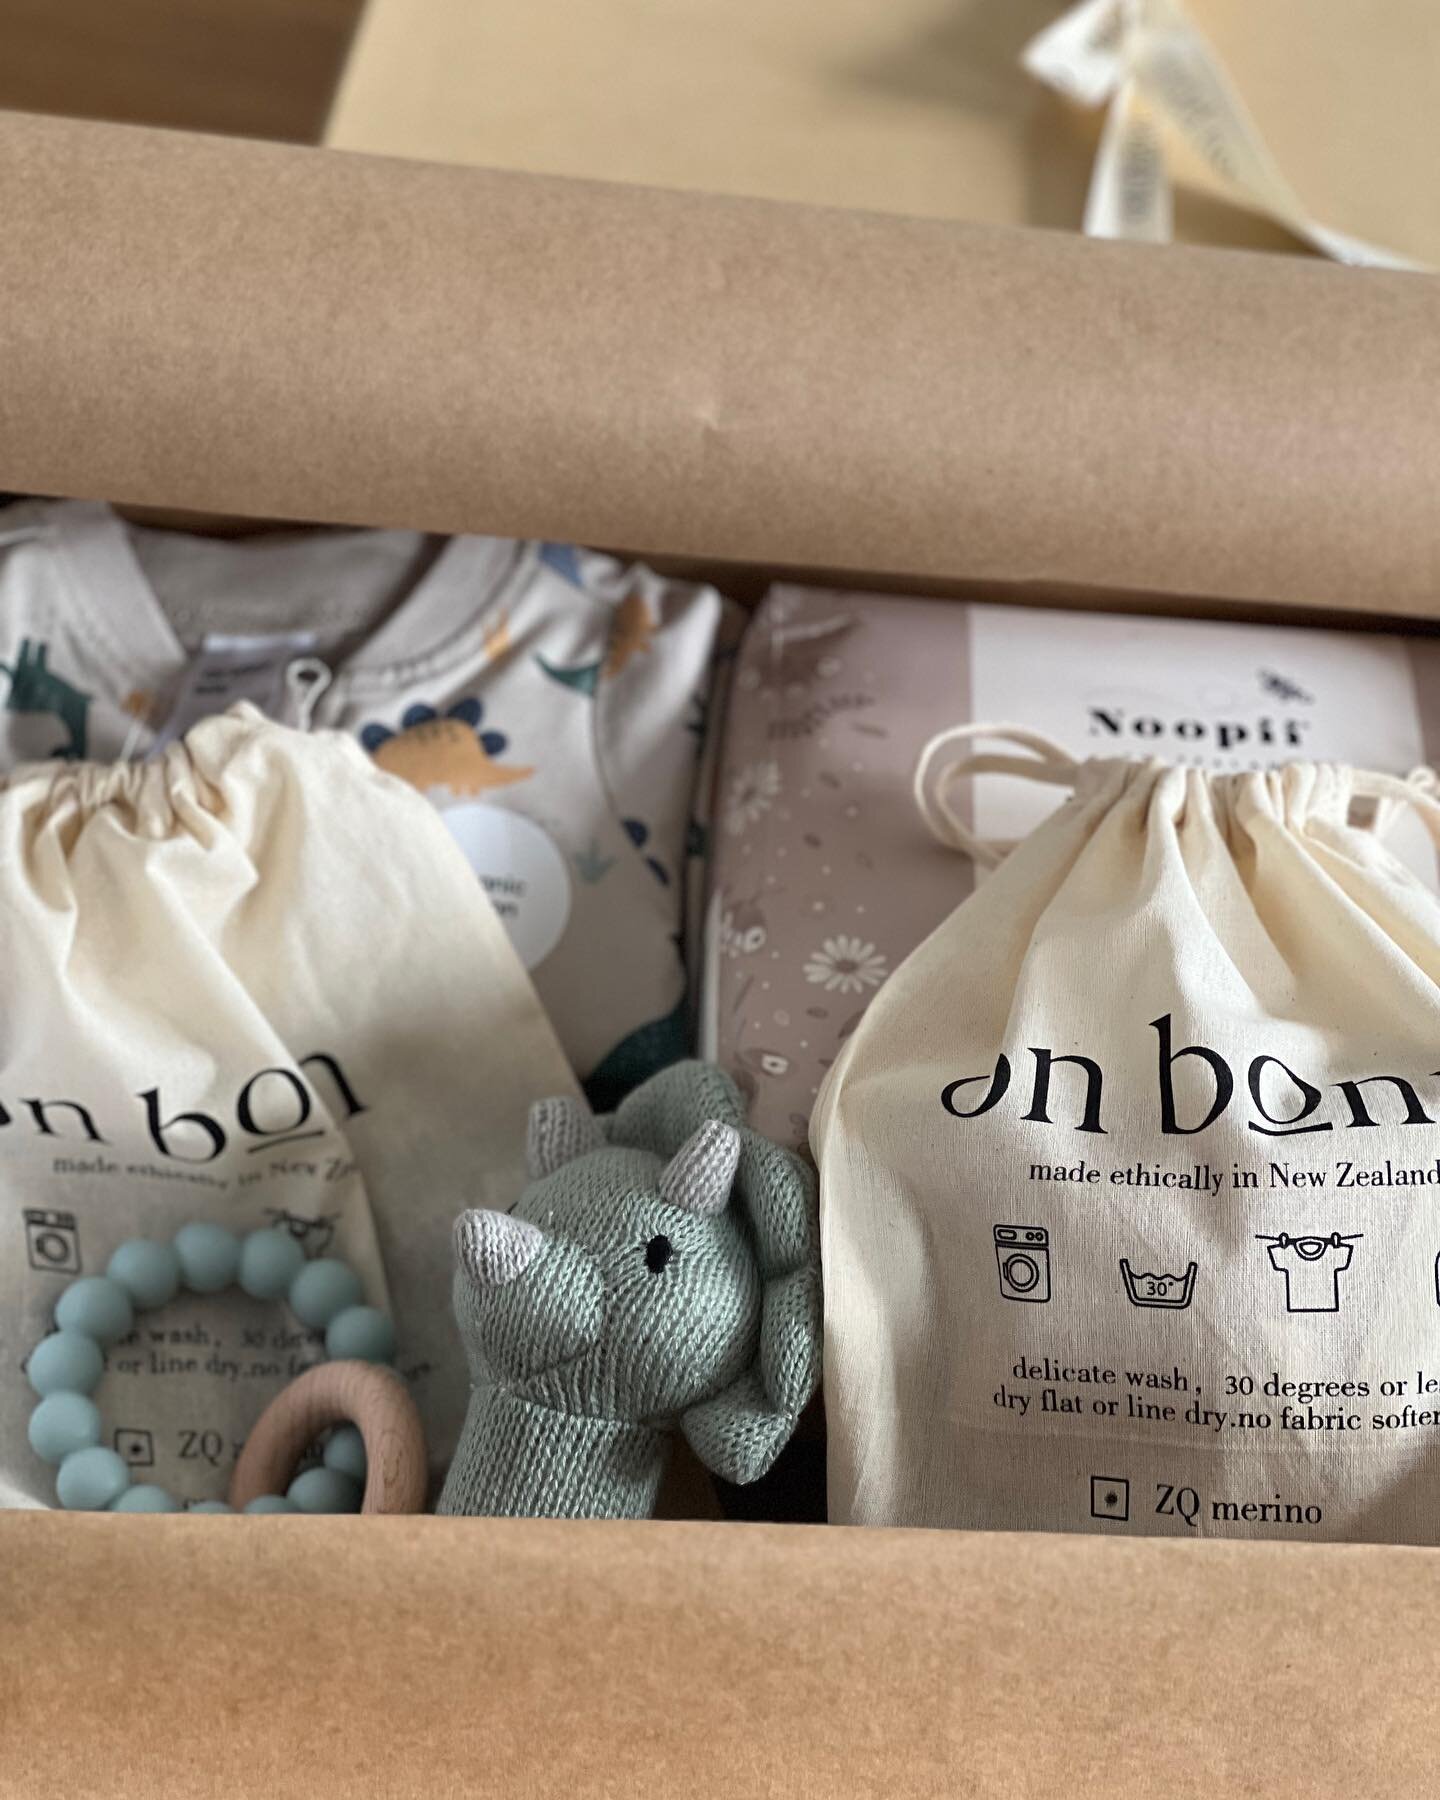 I sometimes put together wee baby gift boxes when someone in work has a baby. Here&rsquo;s today&rsquo;s wee set up. Some lovely @noopiinz nappies, a wee wood and silicone teether, a soft rattle and some On Bonn goodies, a navy newborn twozee, and ma